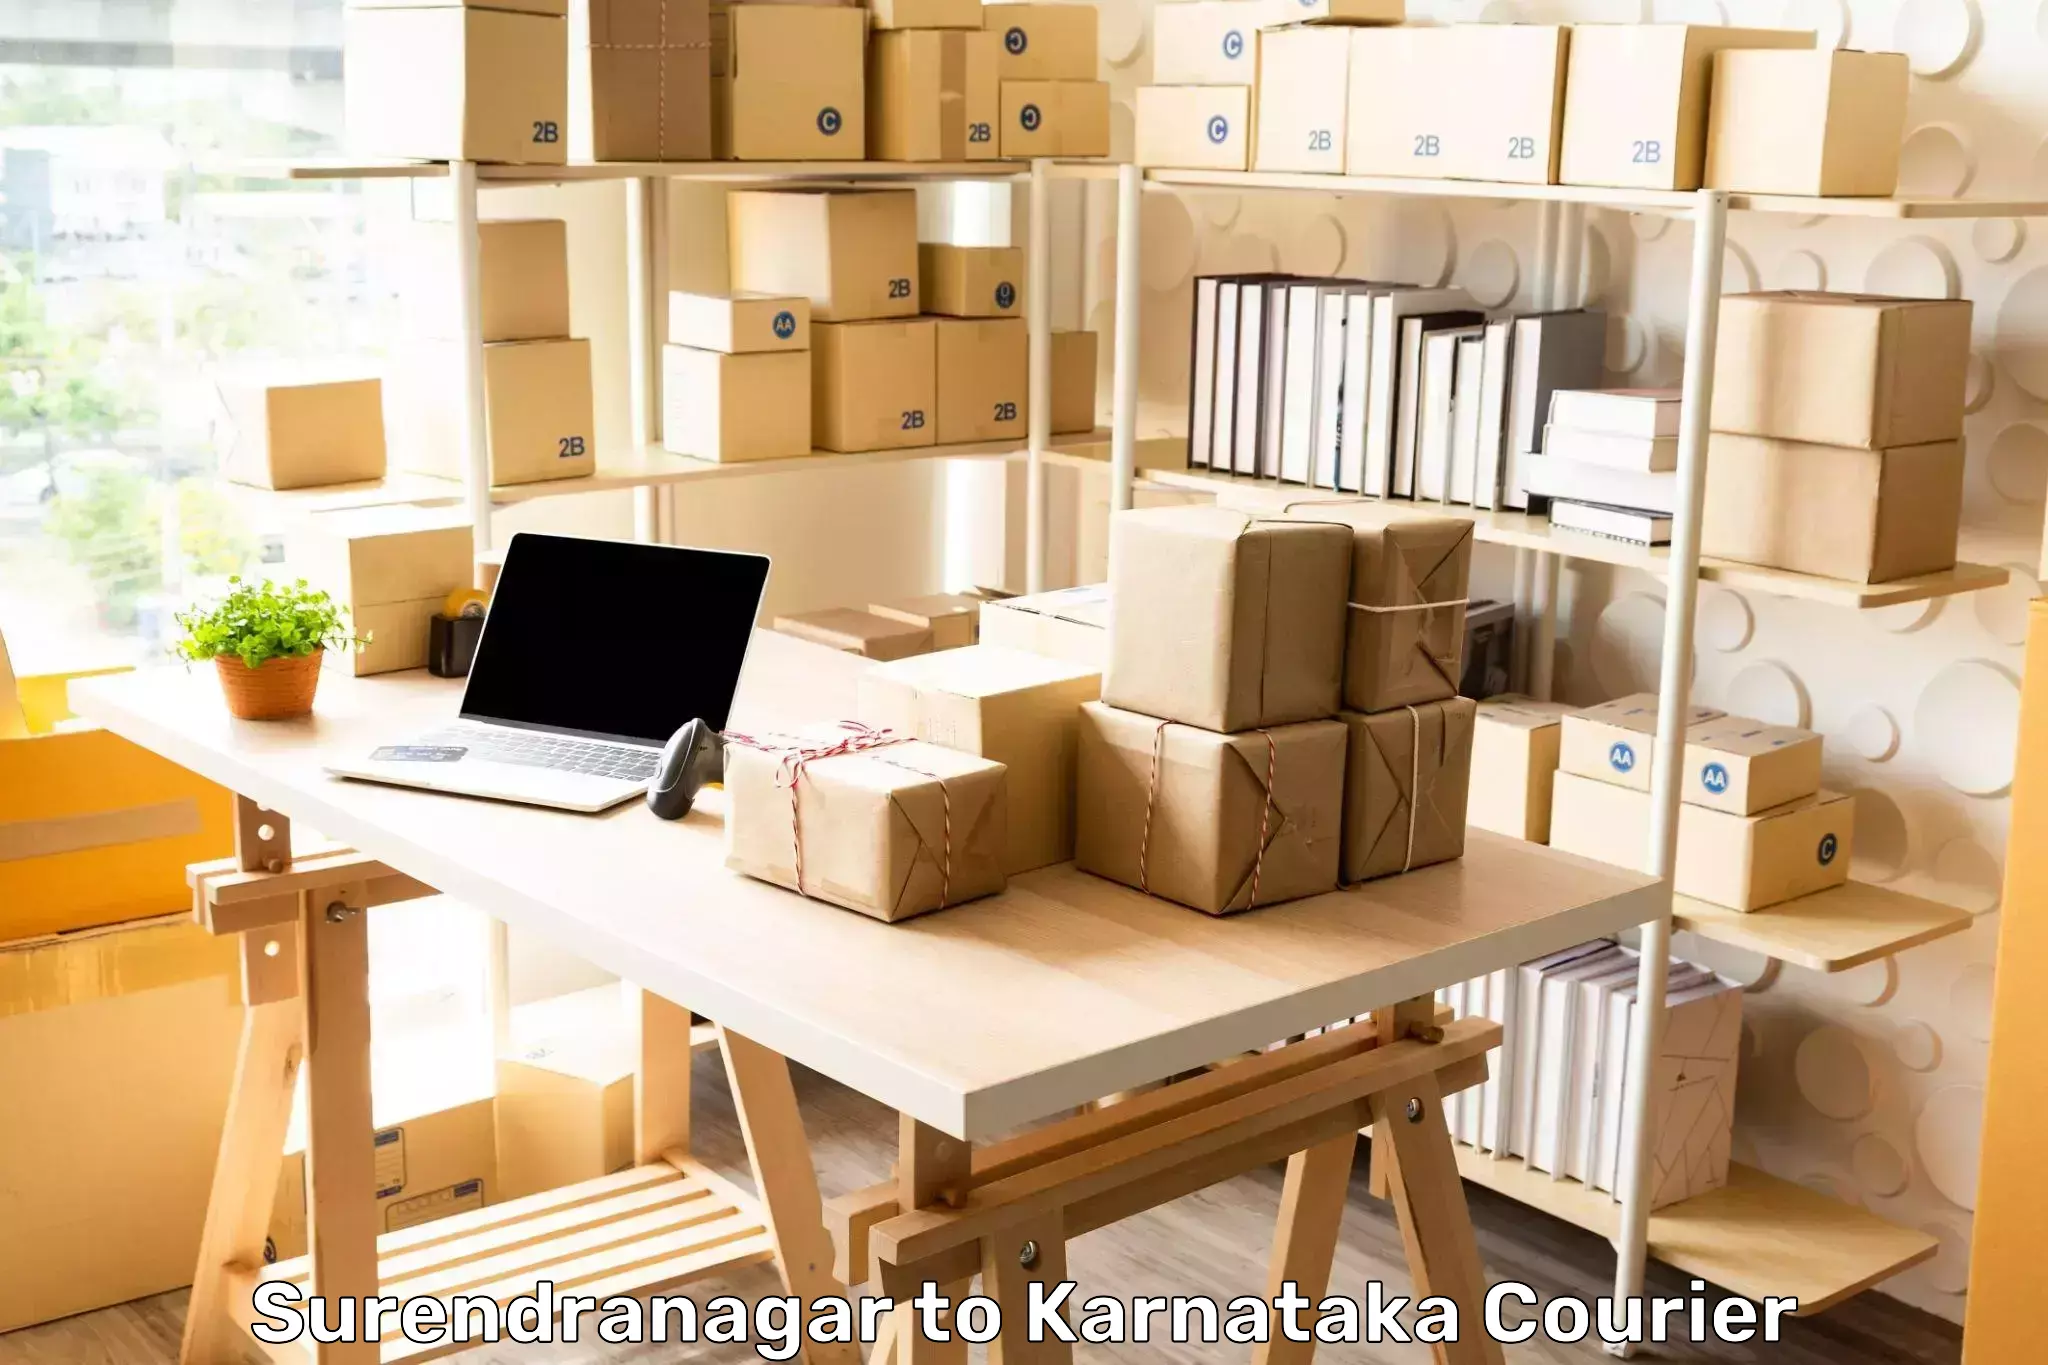 Streamlined logistics management Surendranagar to Manipal Academy of Higher Education